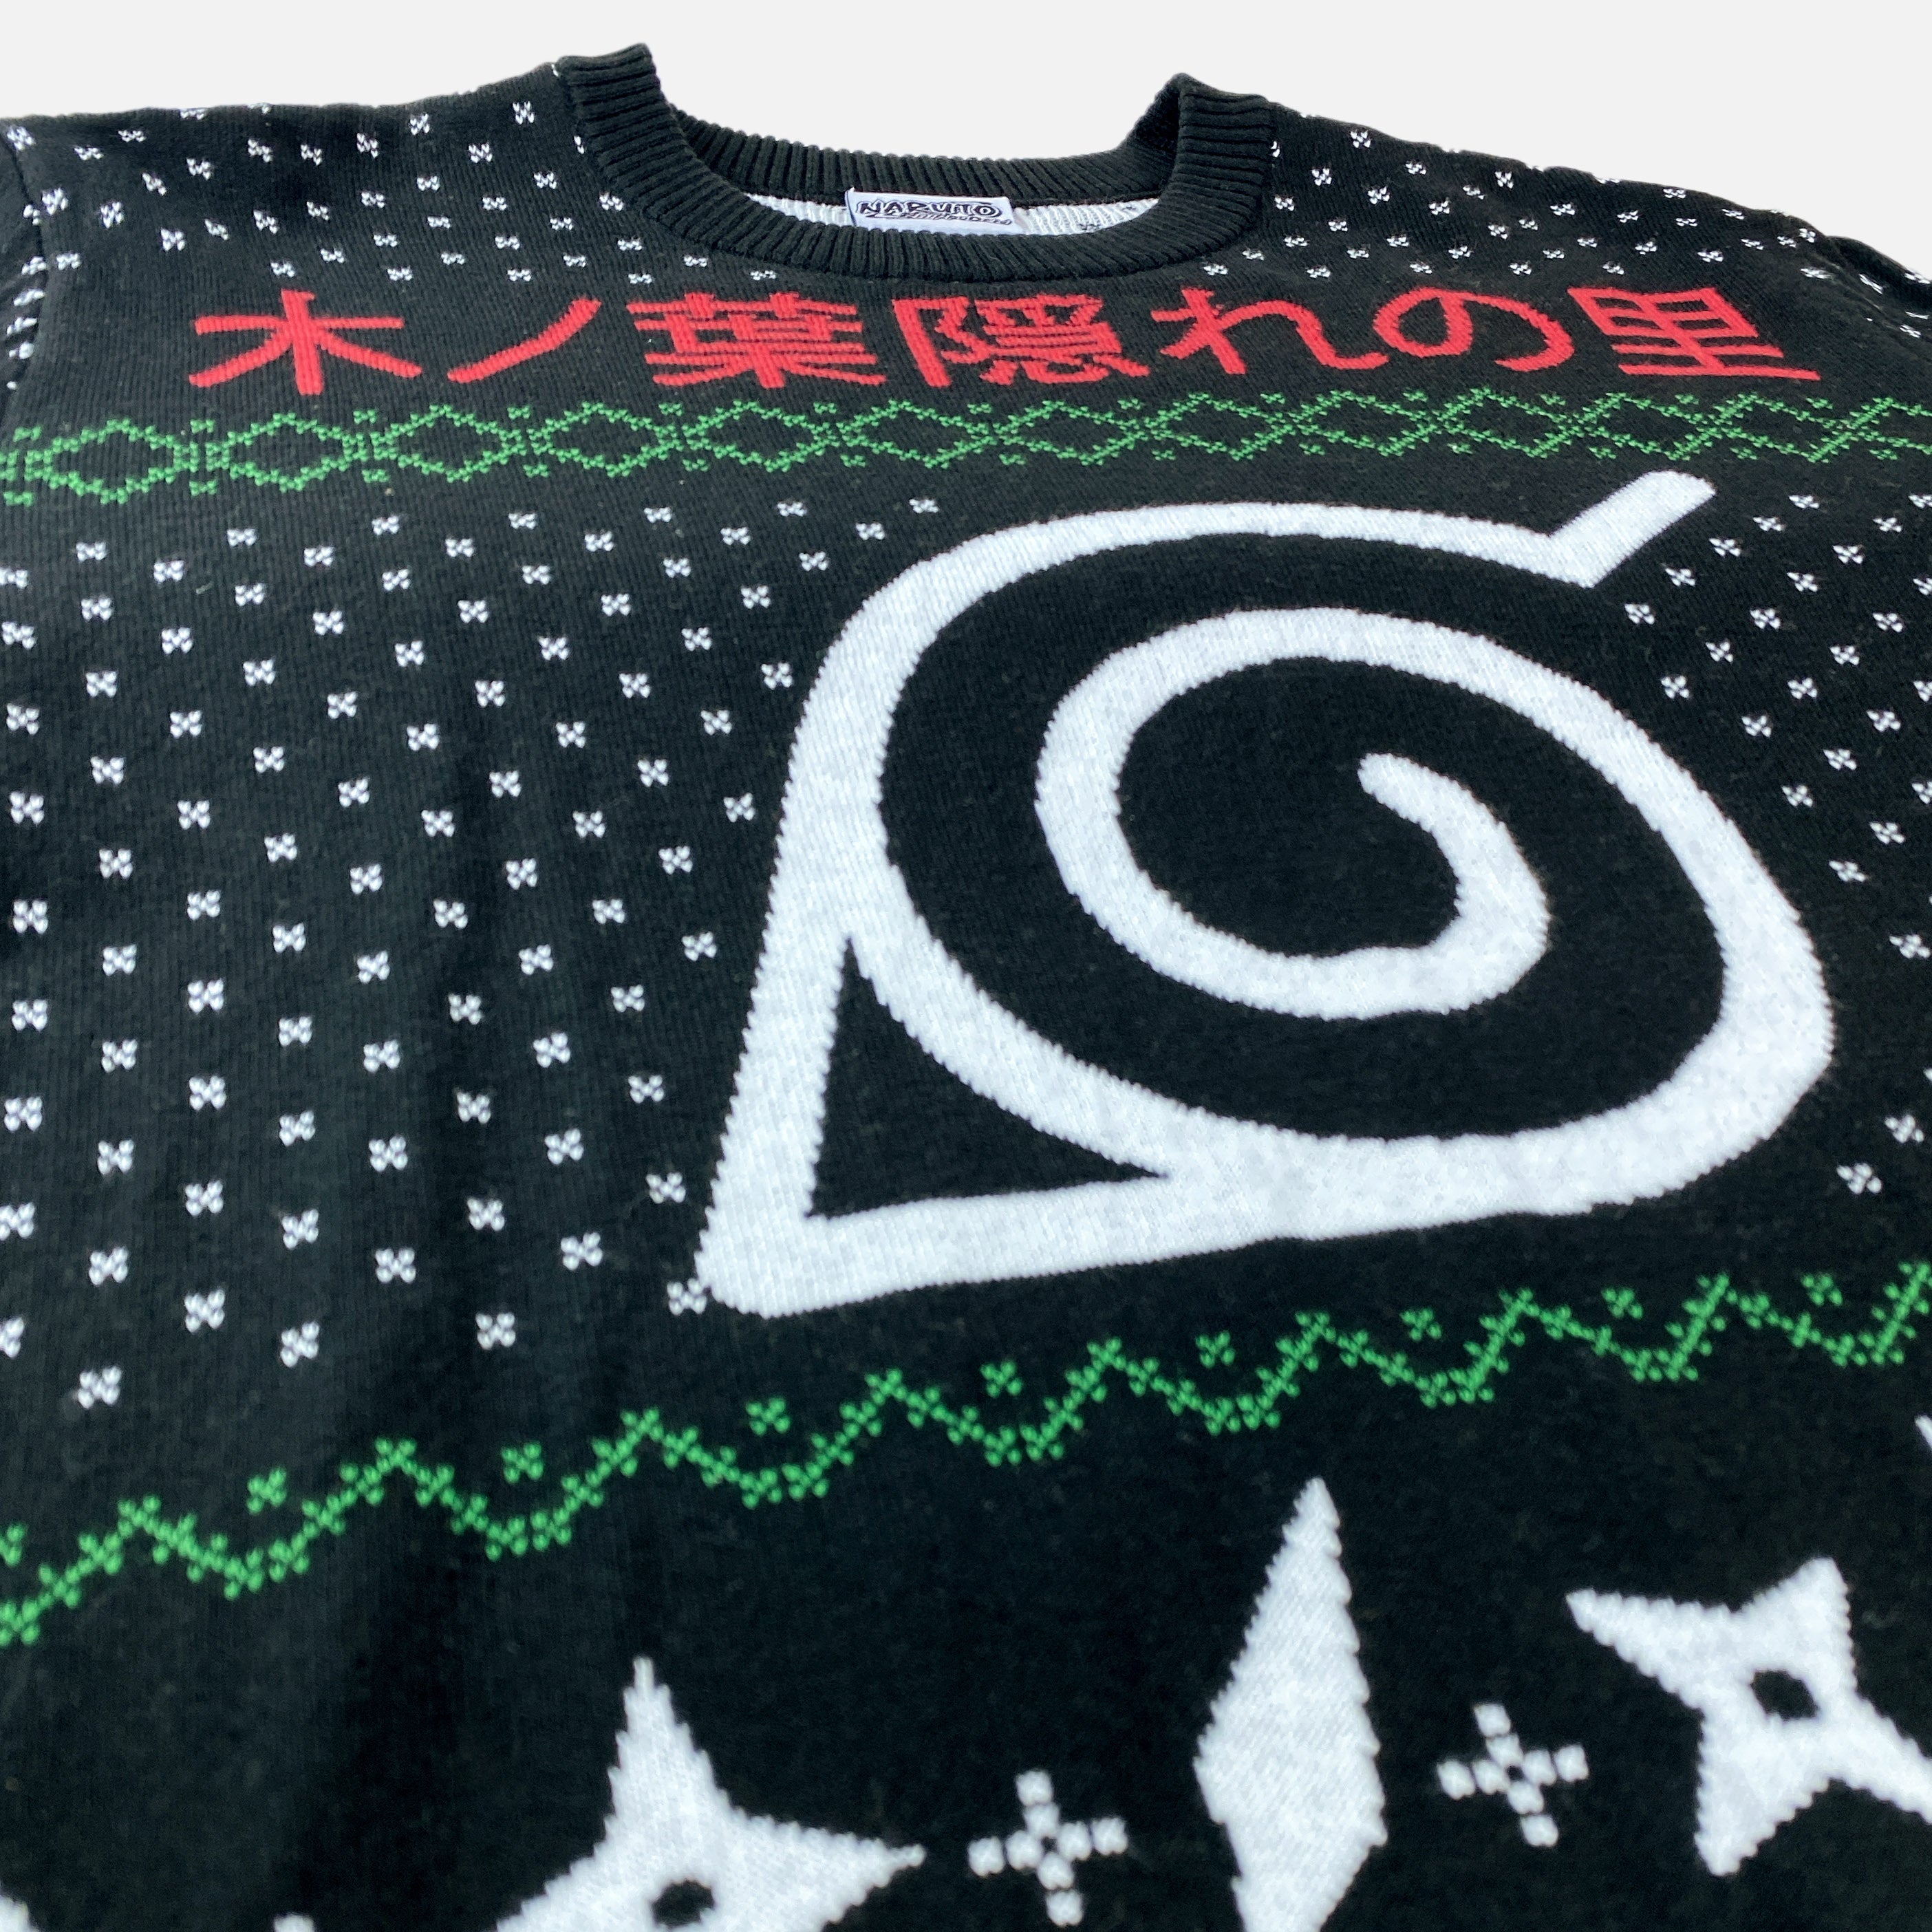 Naruto Shippuden - Hidden Leaf Village Holiday Sweater image count 2